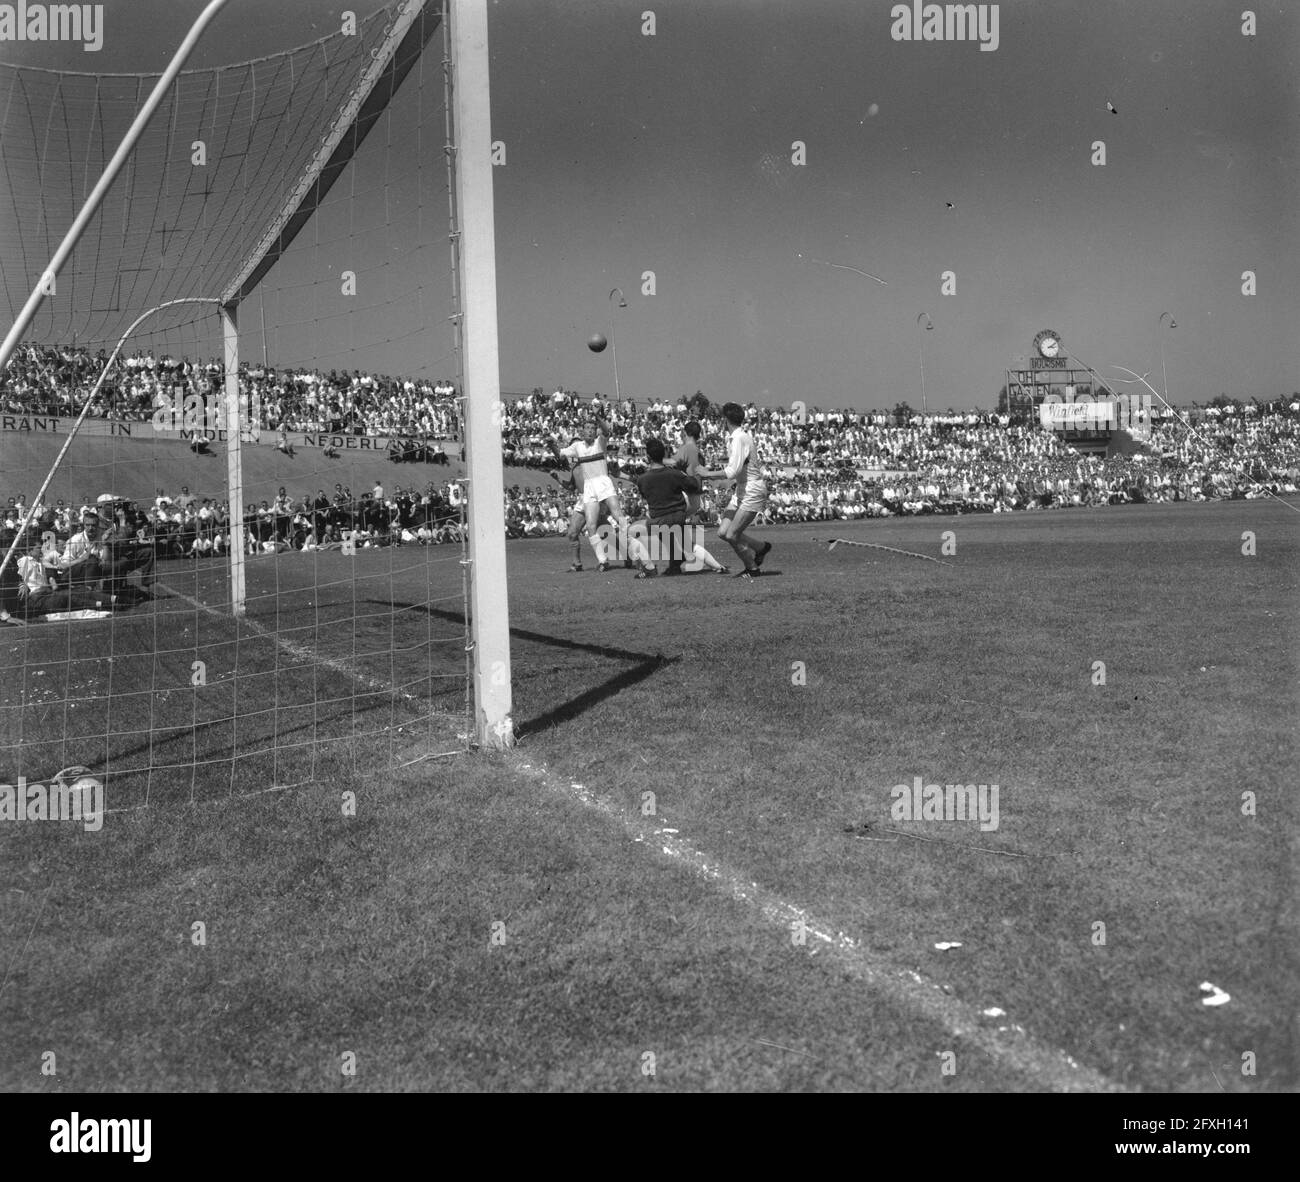 Soccer match DHC against Volewijckers. Game moment, June 25, 1961, sports, soccer matches, The Netherlands, 20th century press agency photo, news to remember, documentary, historic photography 1945-1990, visual stories, human history of the Twentieth Century, capturing moments in time Stock Photo